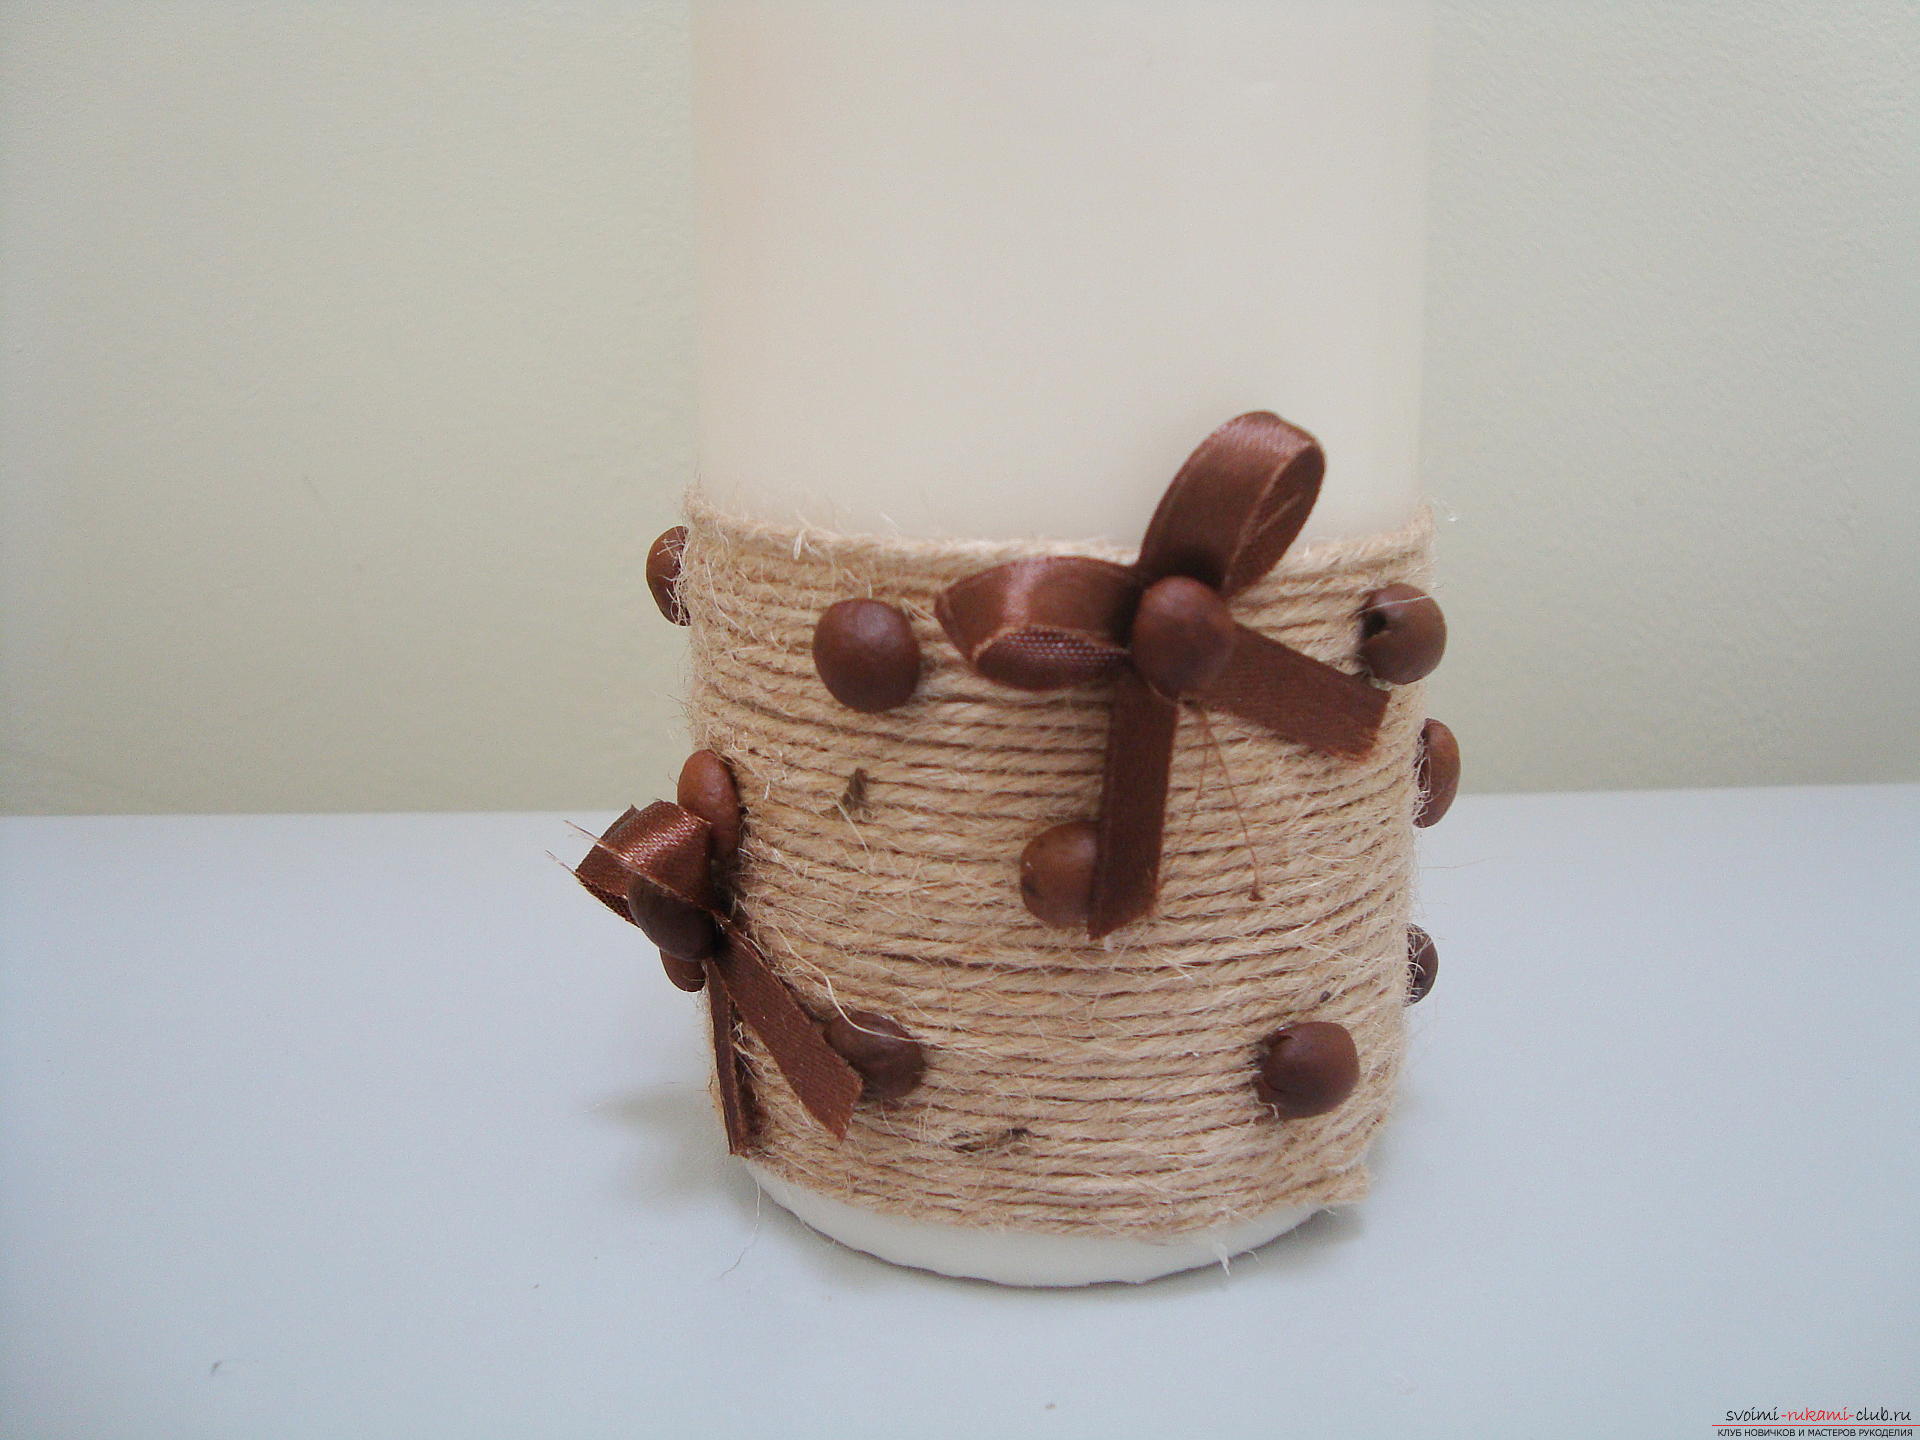 Photos to the step-by-step guide on making a decorative candle made from coffee beans. Photo number 12